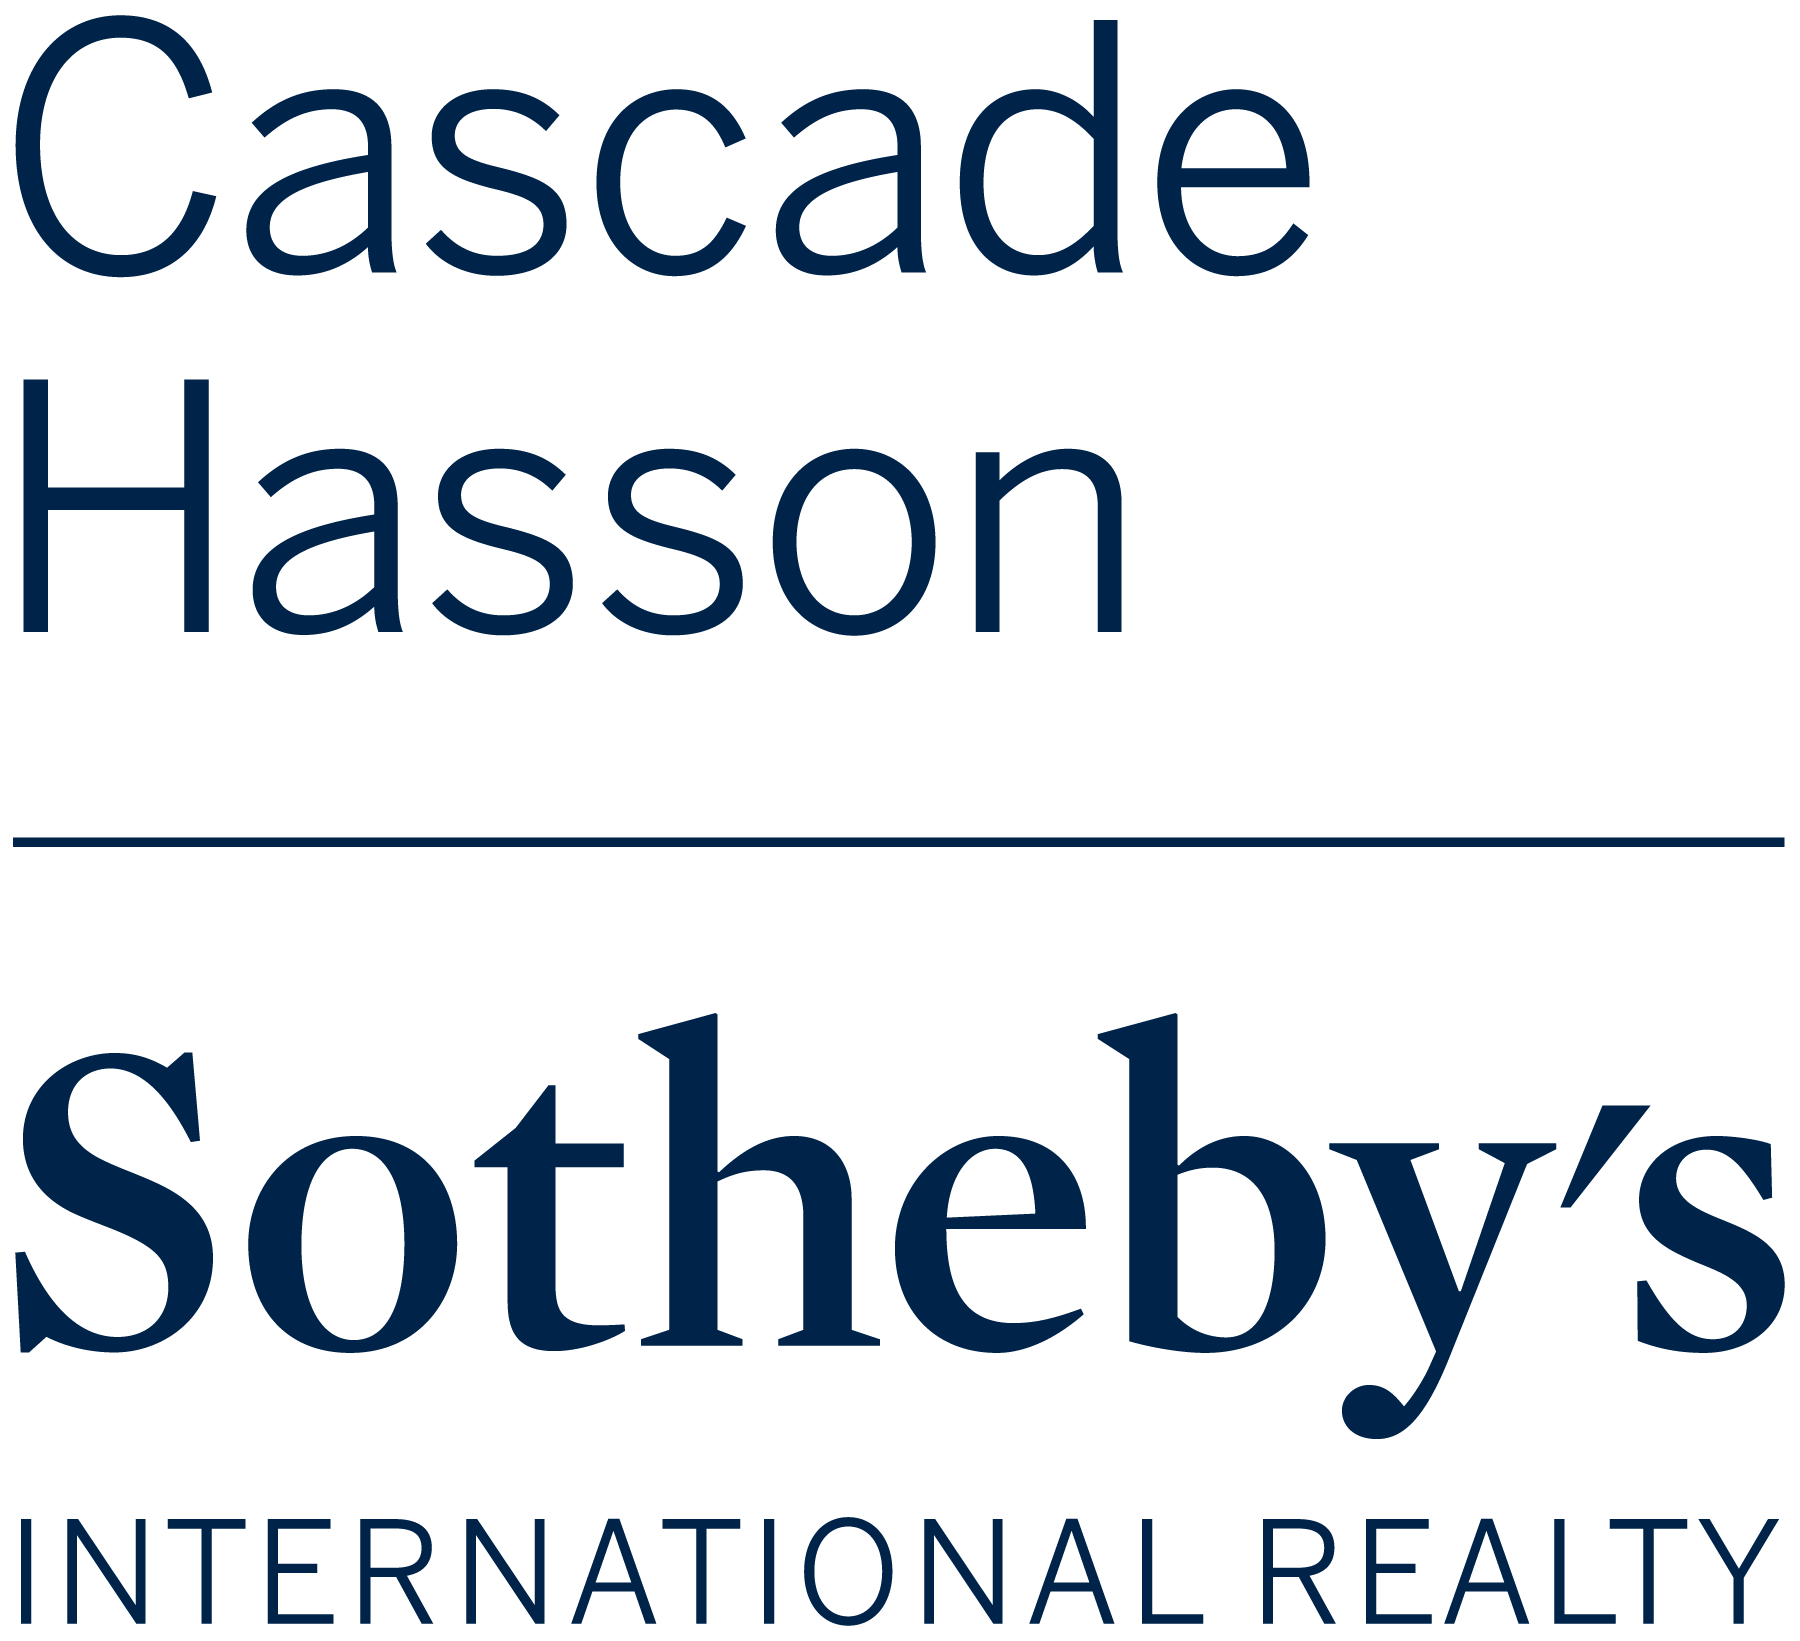 Cascade Hasson Sotheby's International Realty I Studley Homes Group